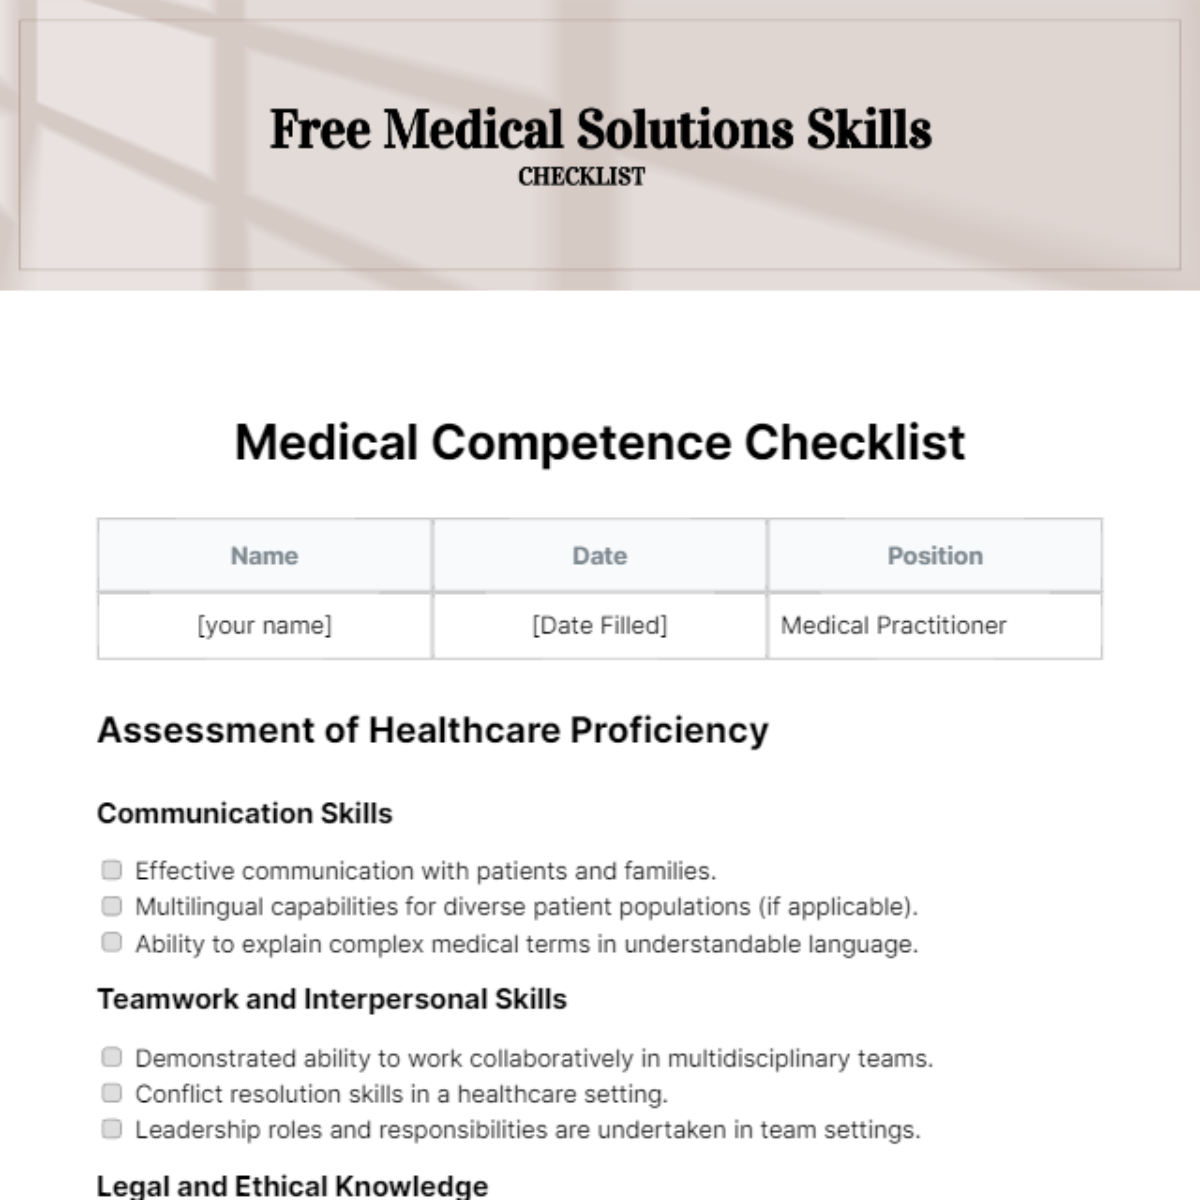 Free Medical Solutions Skills Checklist Template